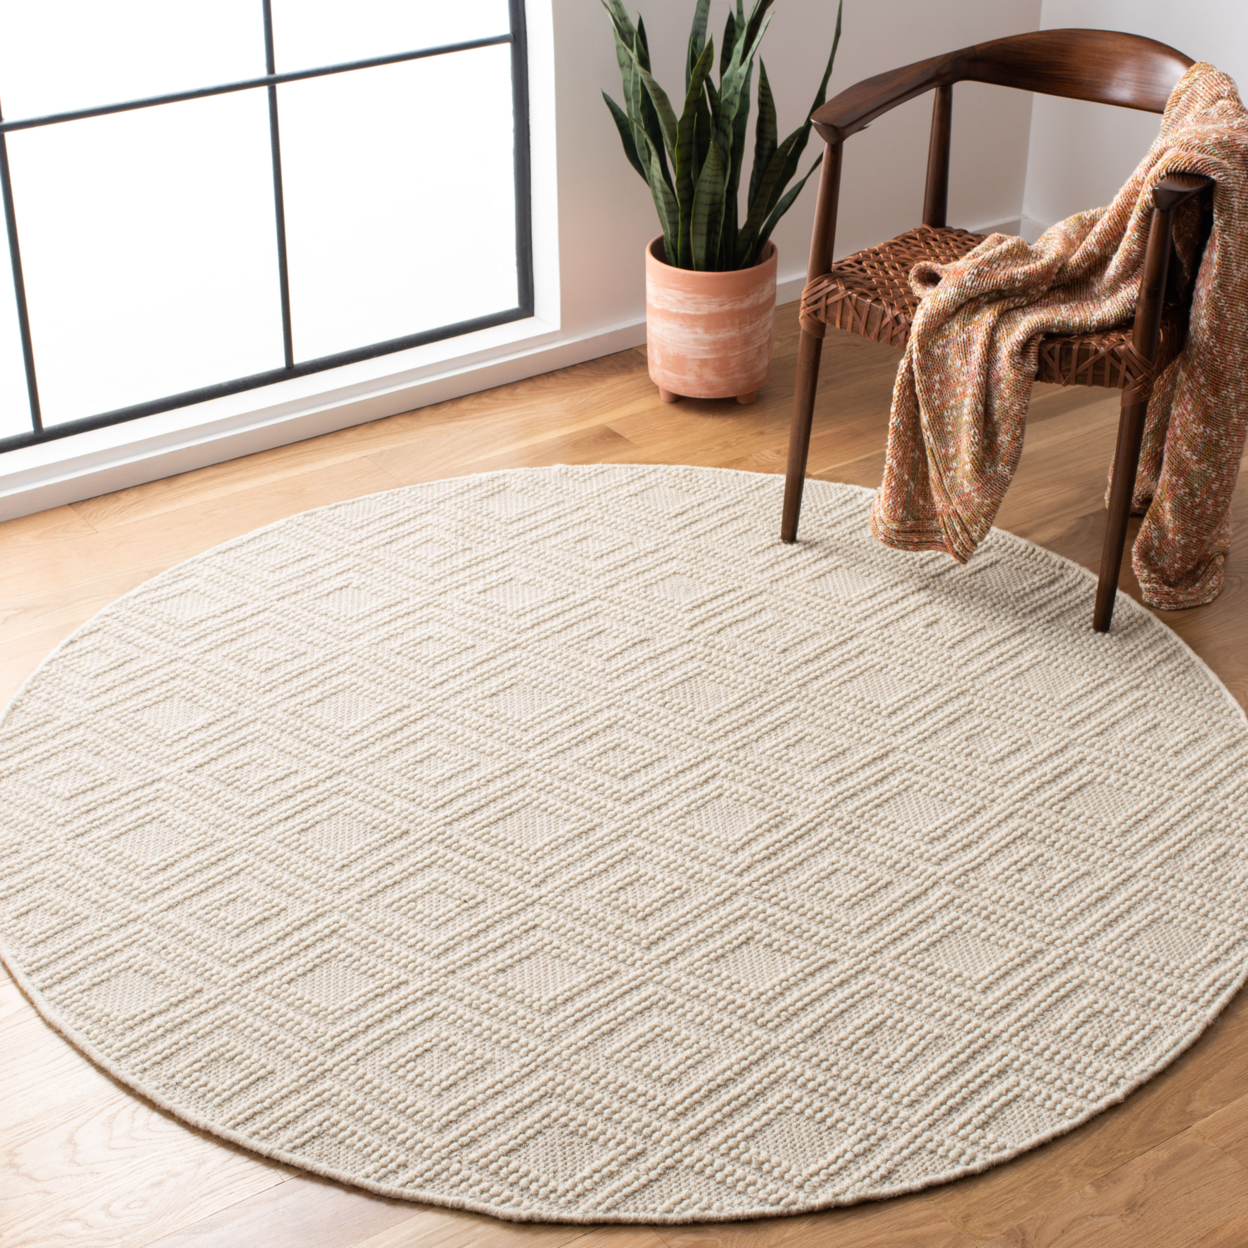 SAFAVIEH Vermont Collection VRM212A Handwoven Ivory Rug - 8' Square